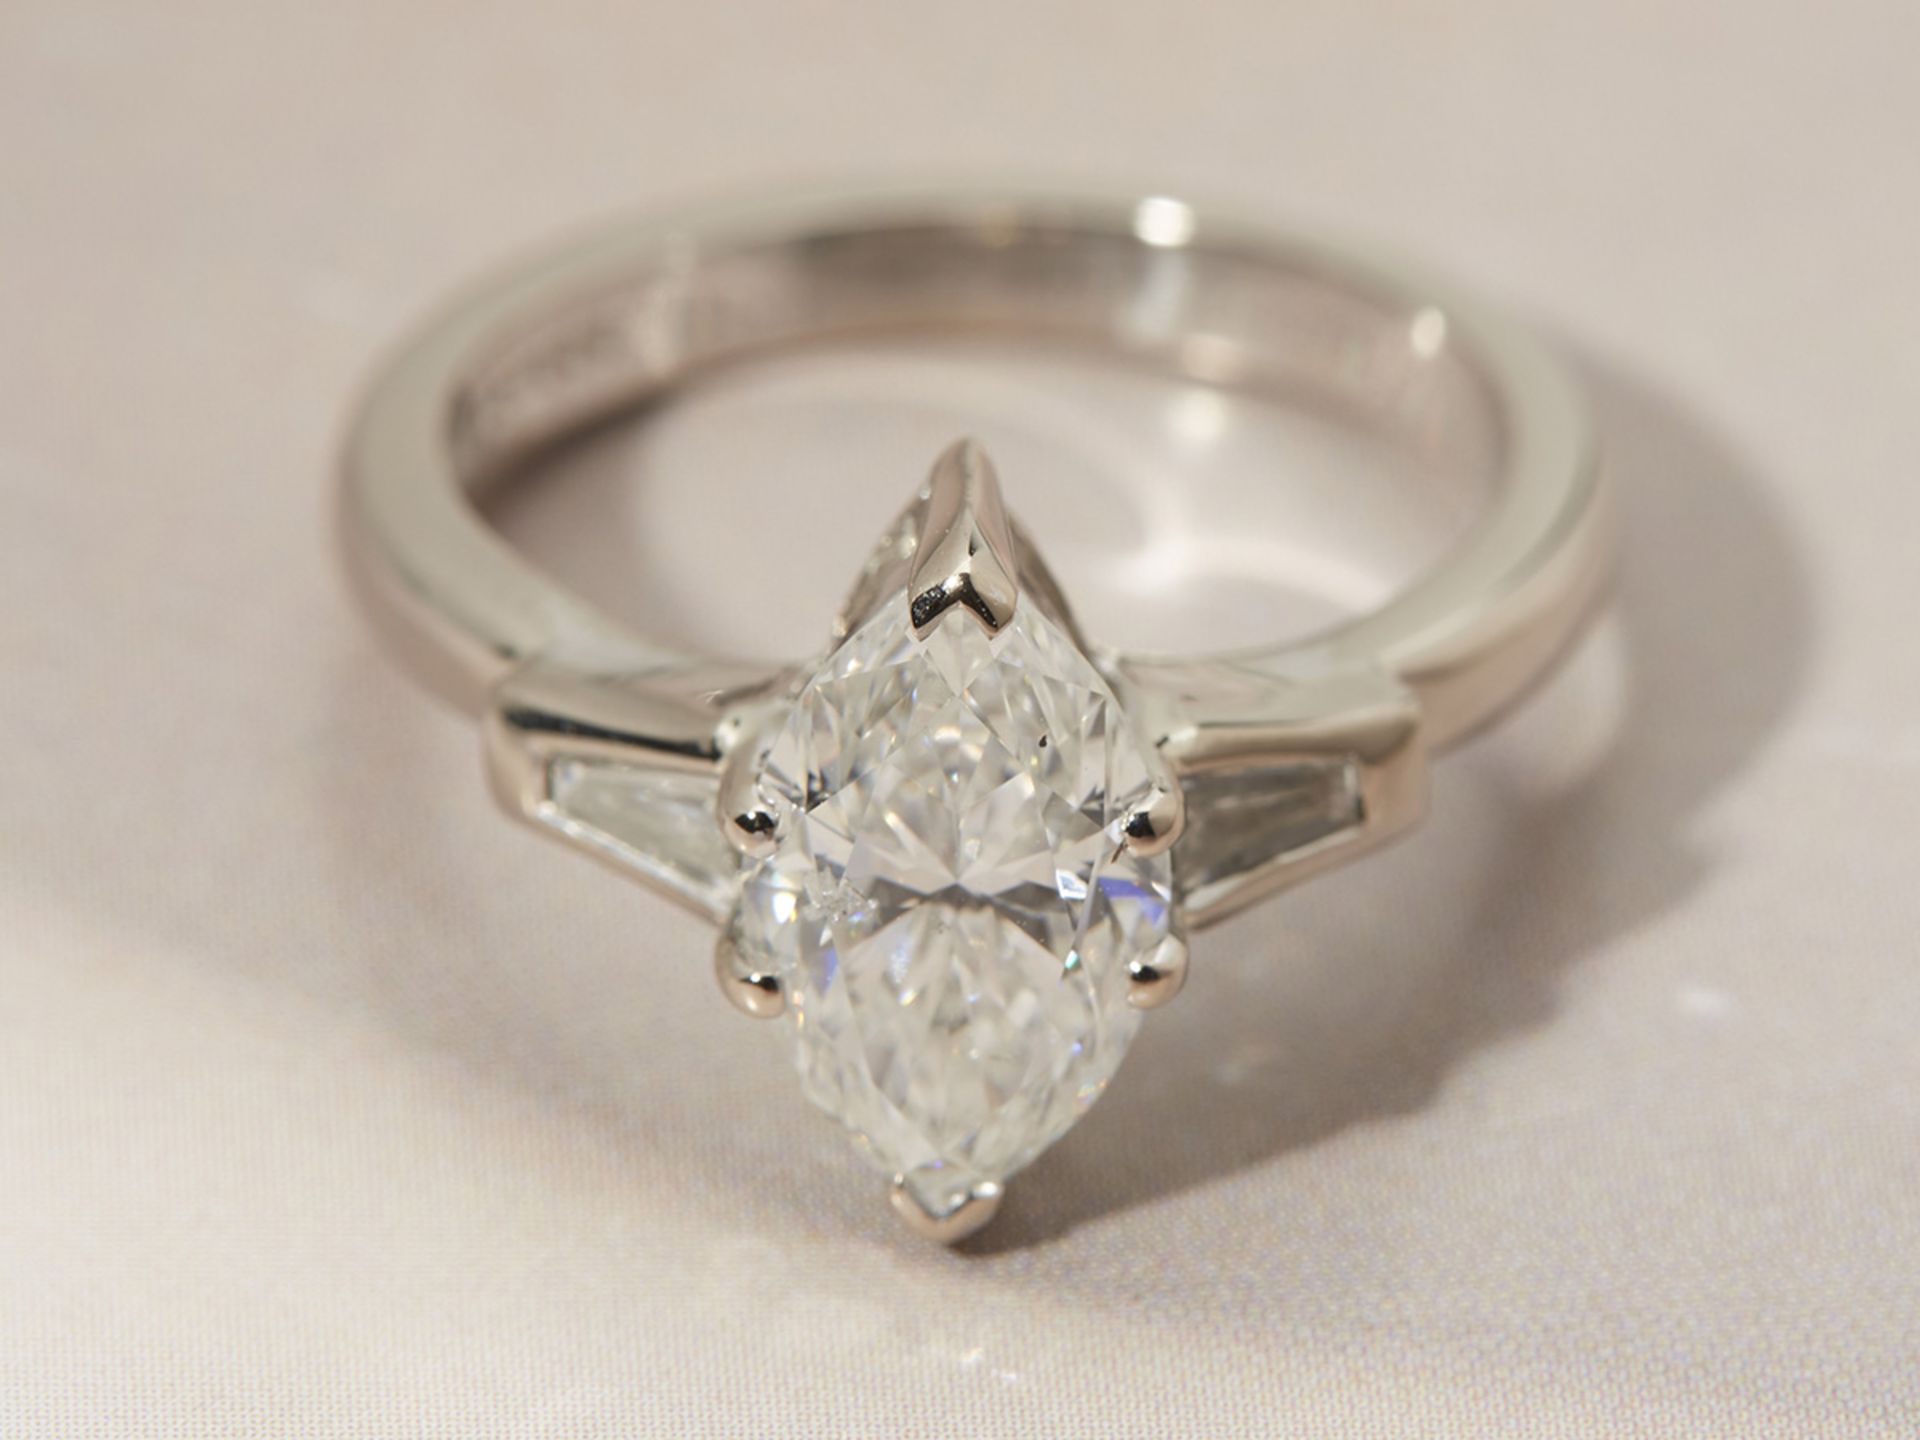 18k White Gold Marquise Cut 2.00ct Diamond Ring - Image 2 of 5